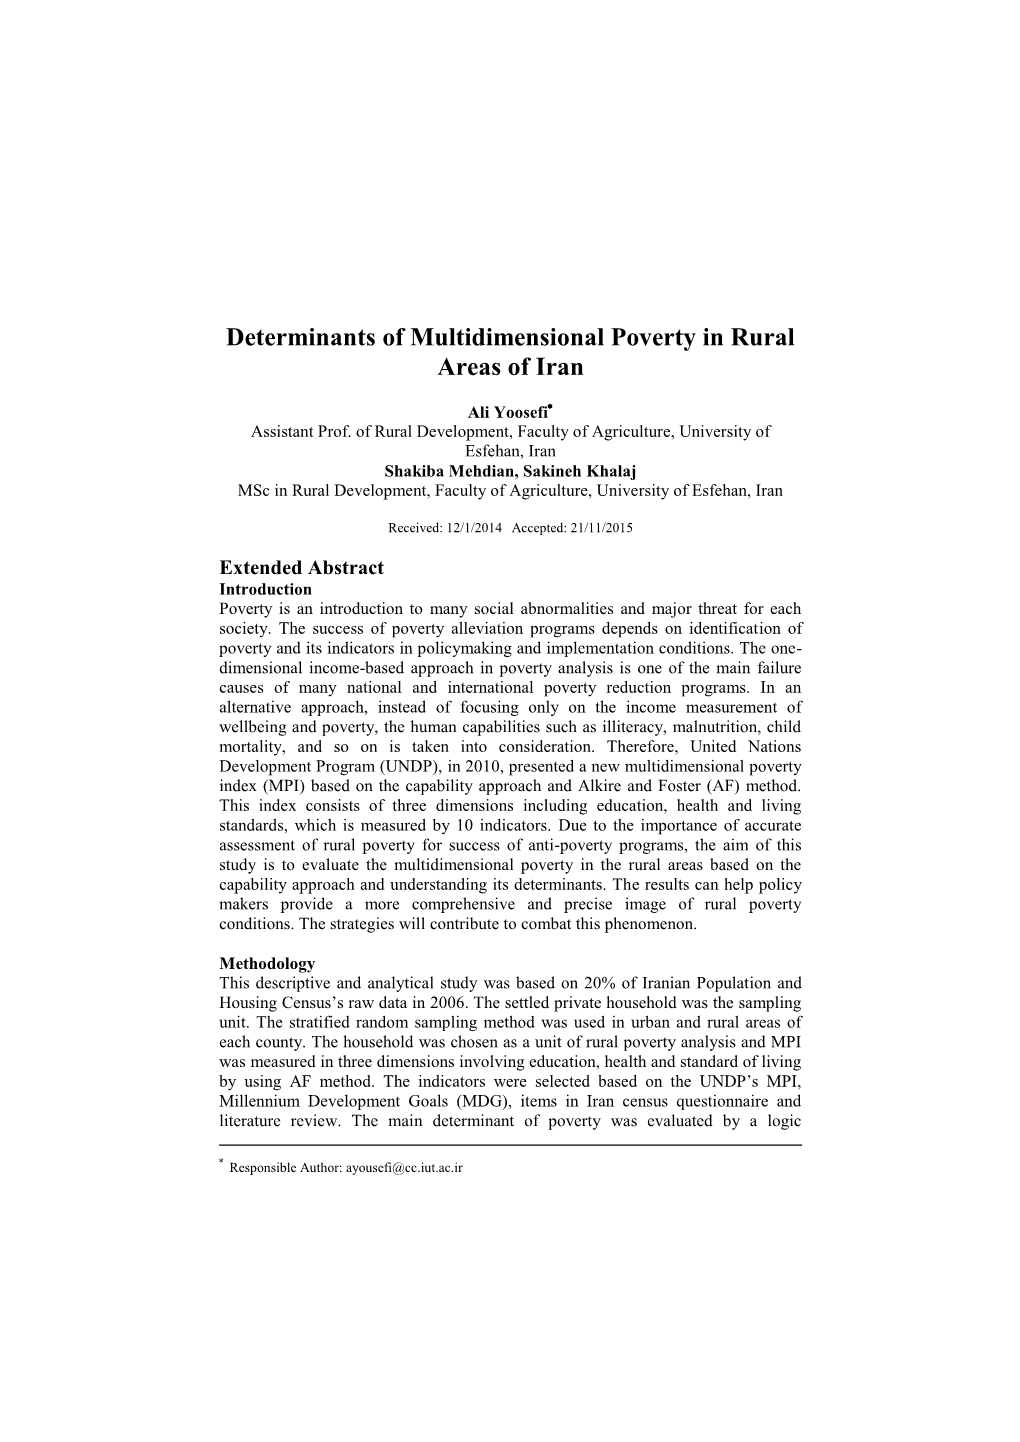 Determinants of Multidimensional Poverty in Rural Areas of Iran